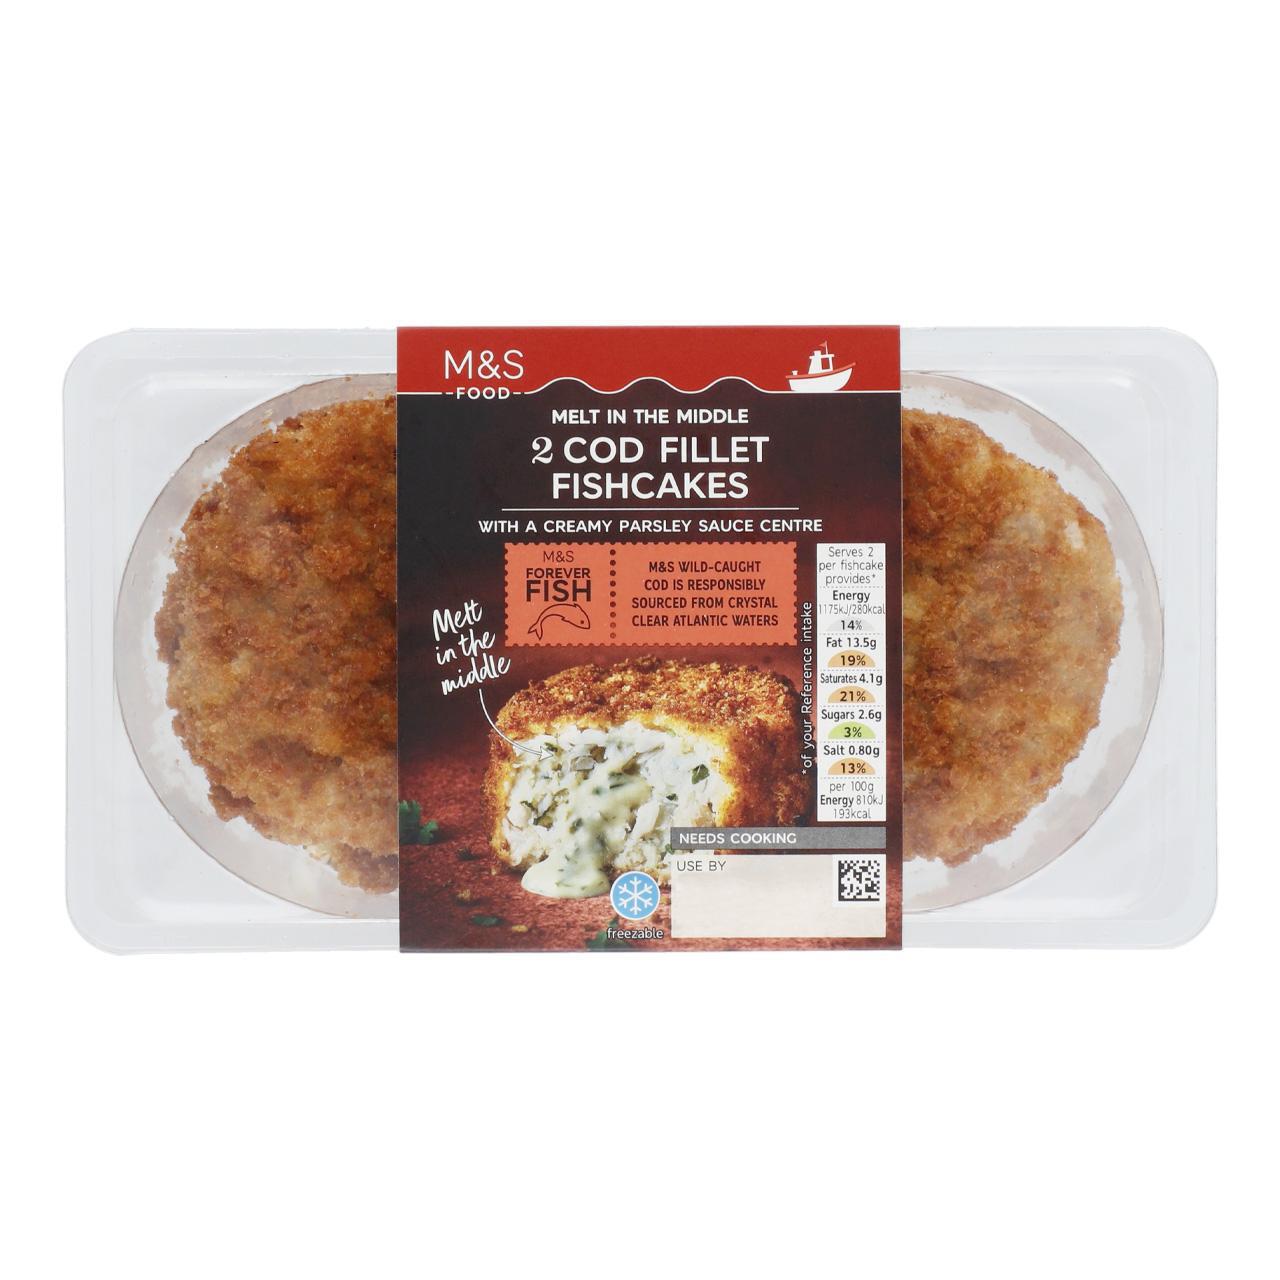 M&S Melt in the Middle Cod Fillet Fishcakes with Parsley Sauce 290g